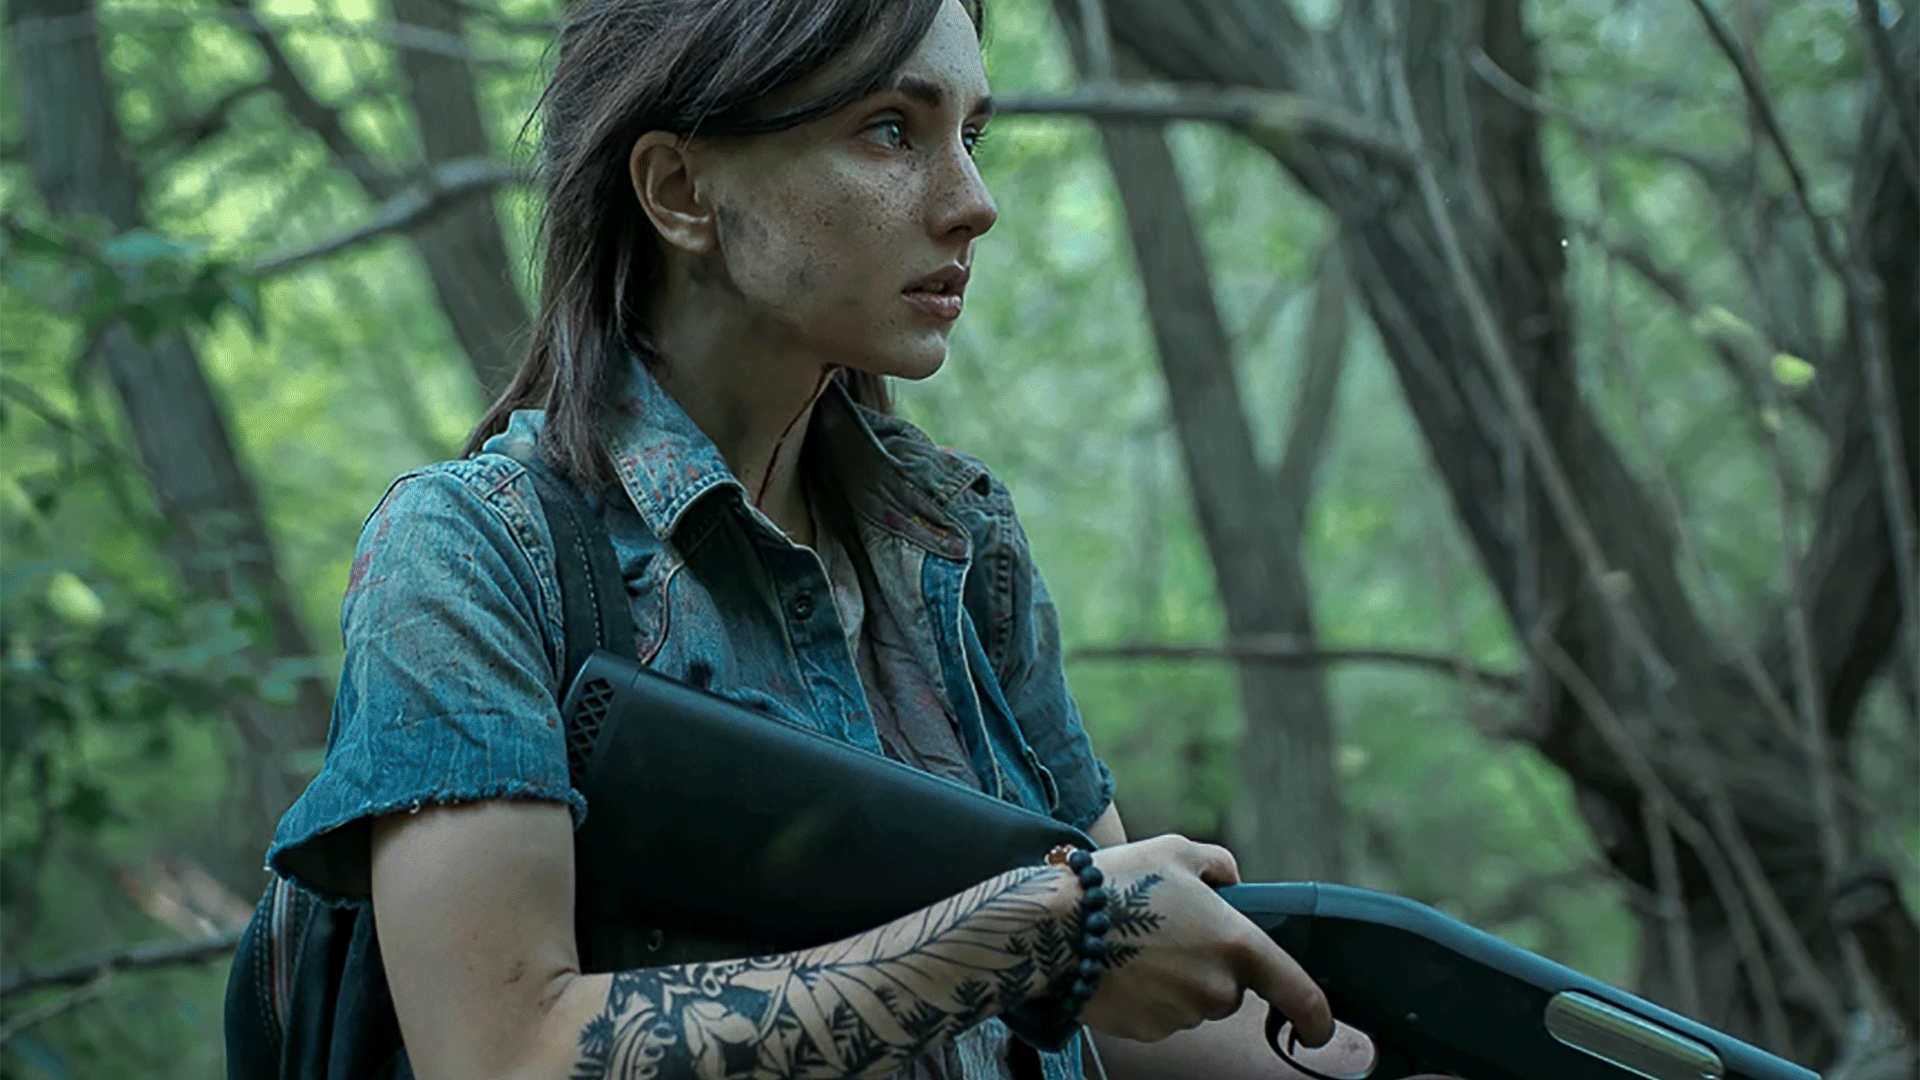 The Last Of Us Part 2: 10 Ellie Cosplay That Look Just Like The Games